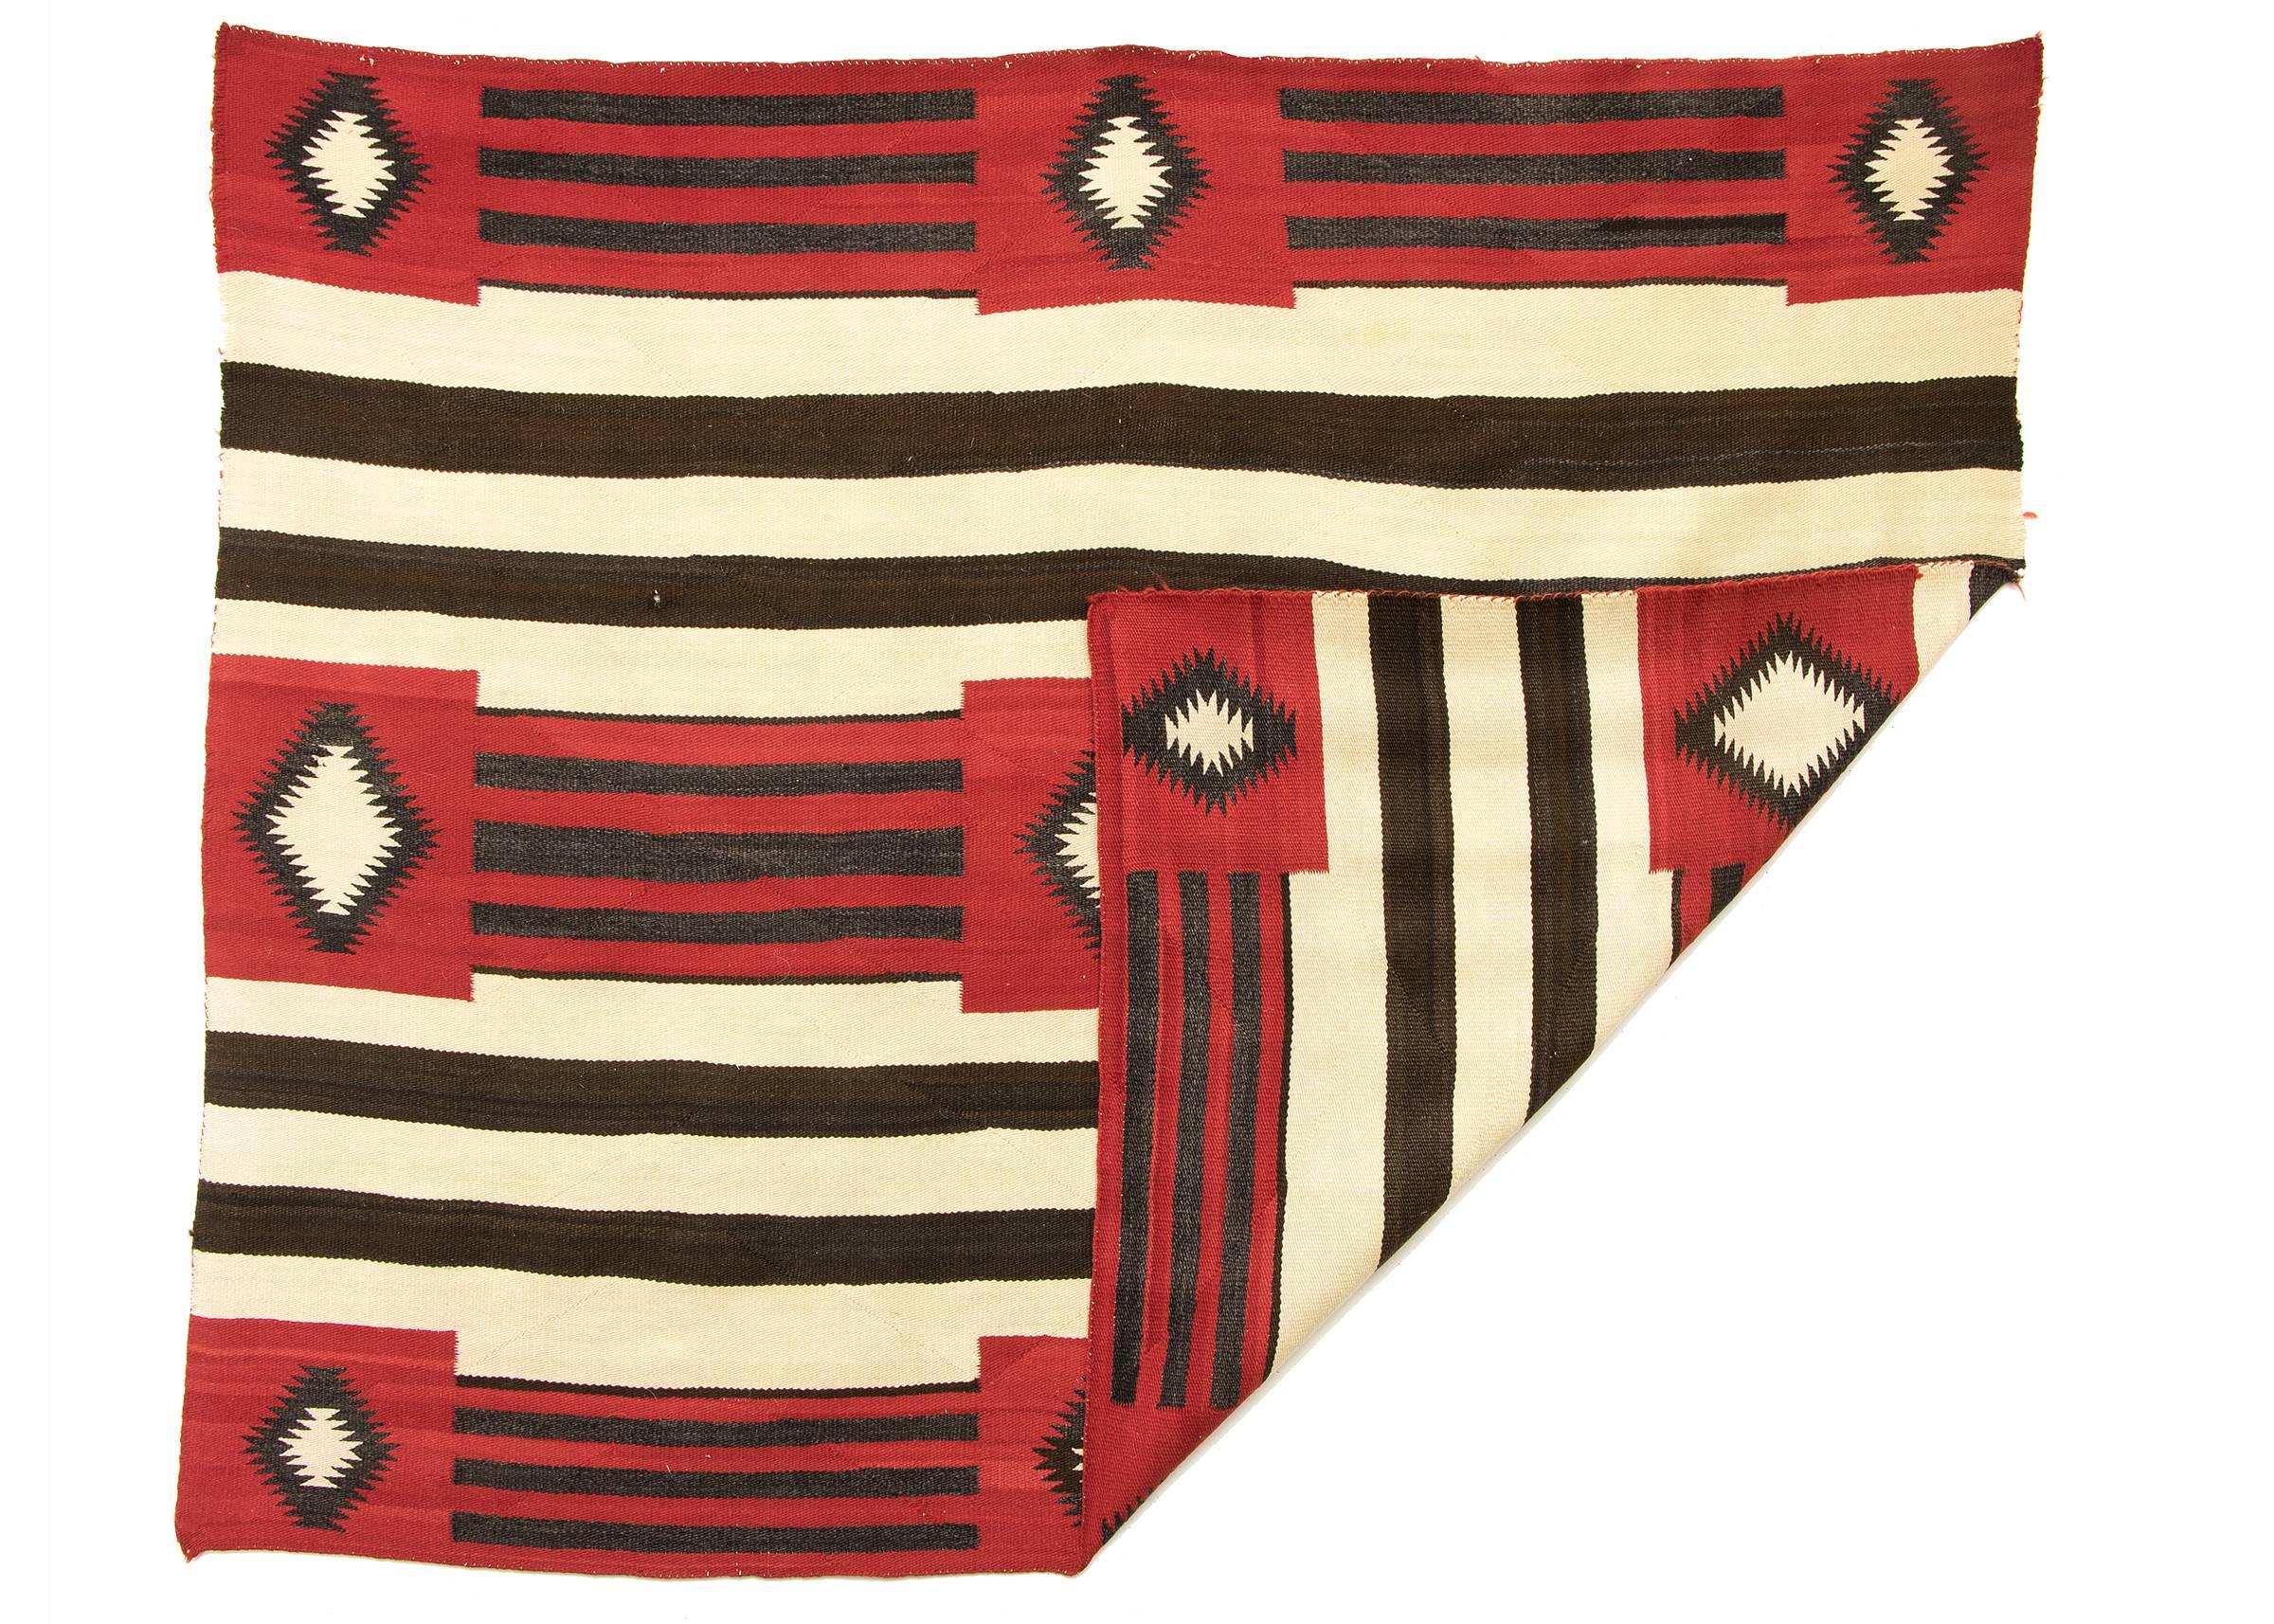 This rug is a revival of a Chief's wearing blanket in a third phase variant (or fourth phase) pattern with a nine-point pattern against a Classic banded ground.

Woven of native hand-spun wool in natural fleece colors of ivory and brown/black with